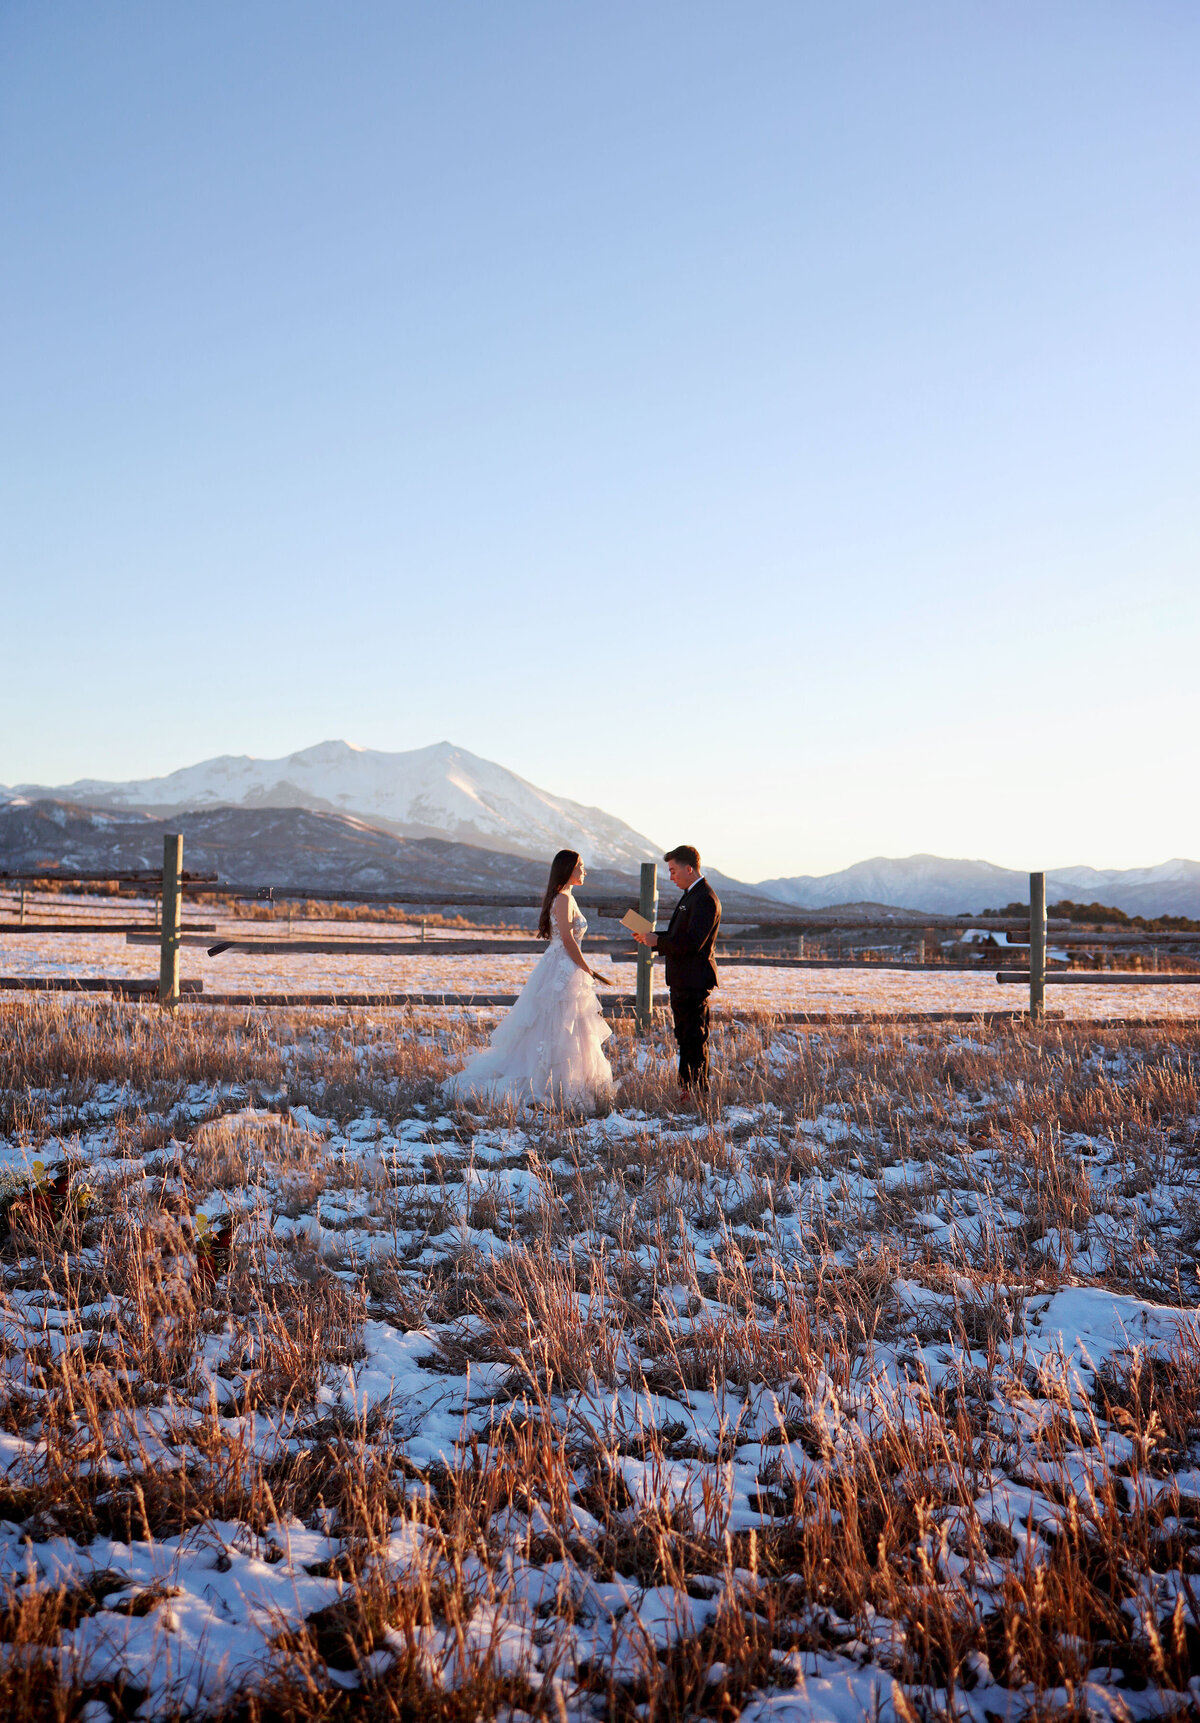 A bride and groom standing in front of a white snowy mountain backdrop, eloping.